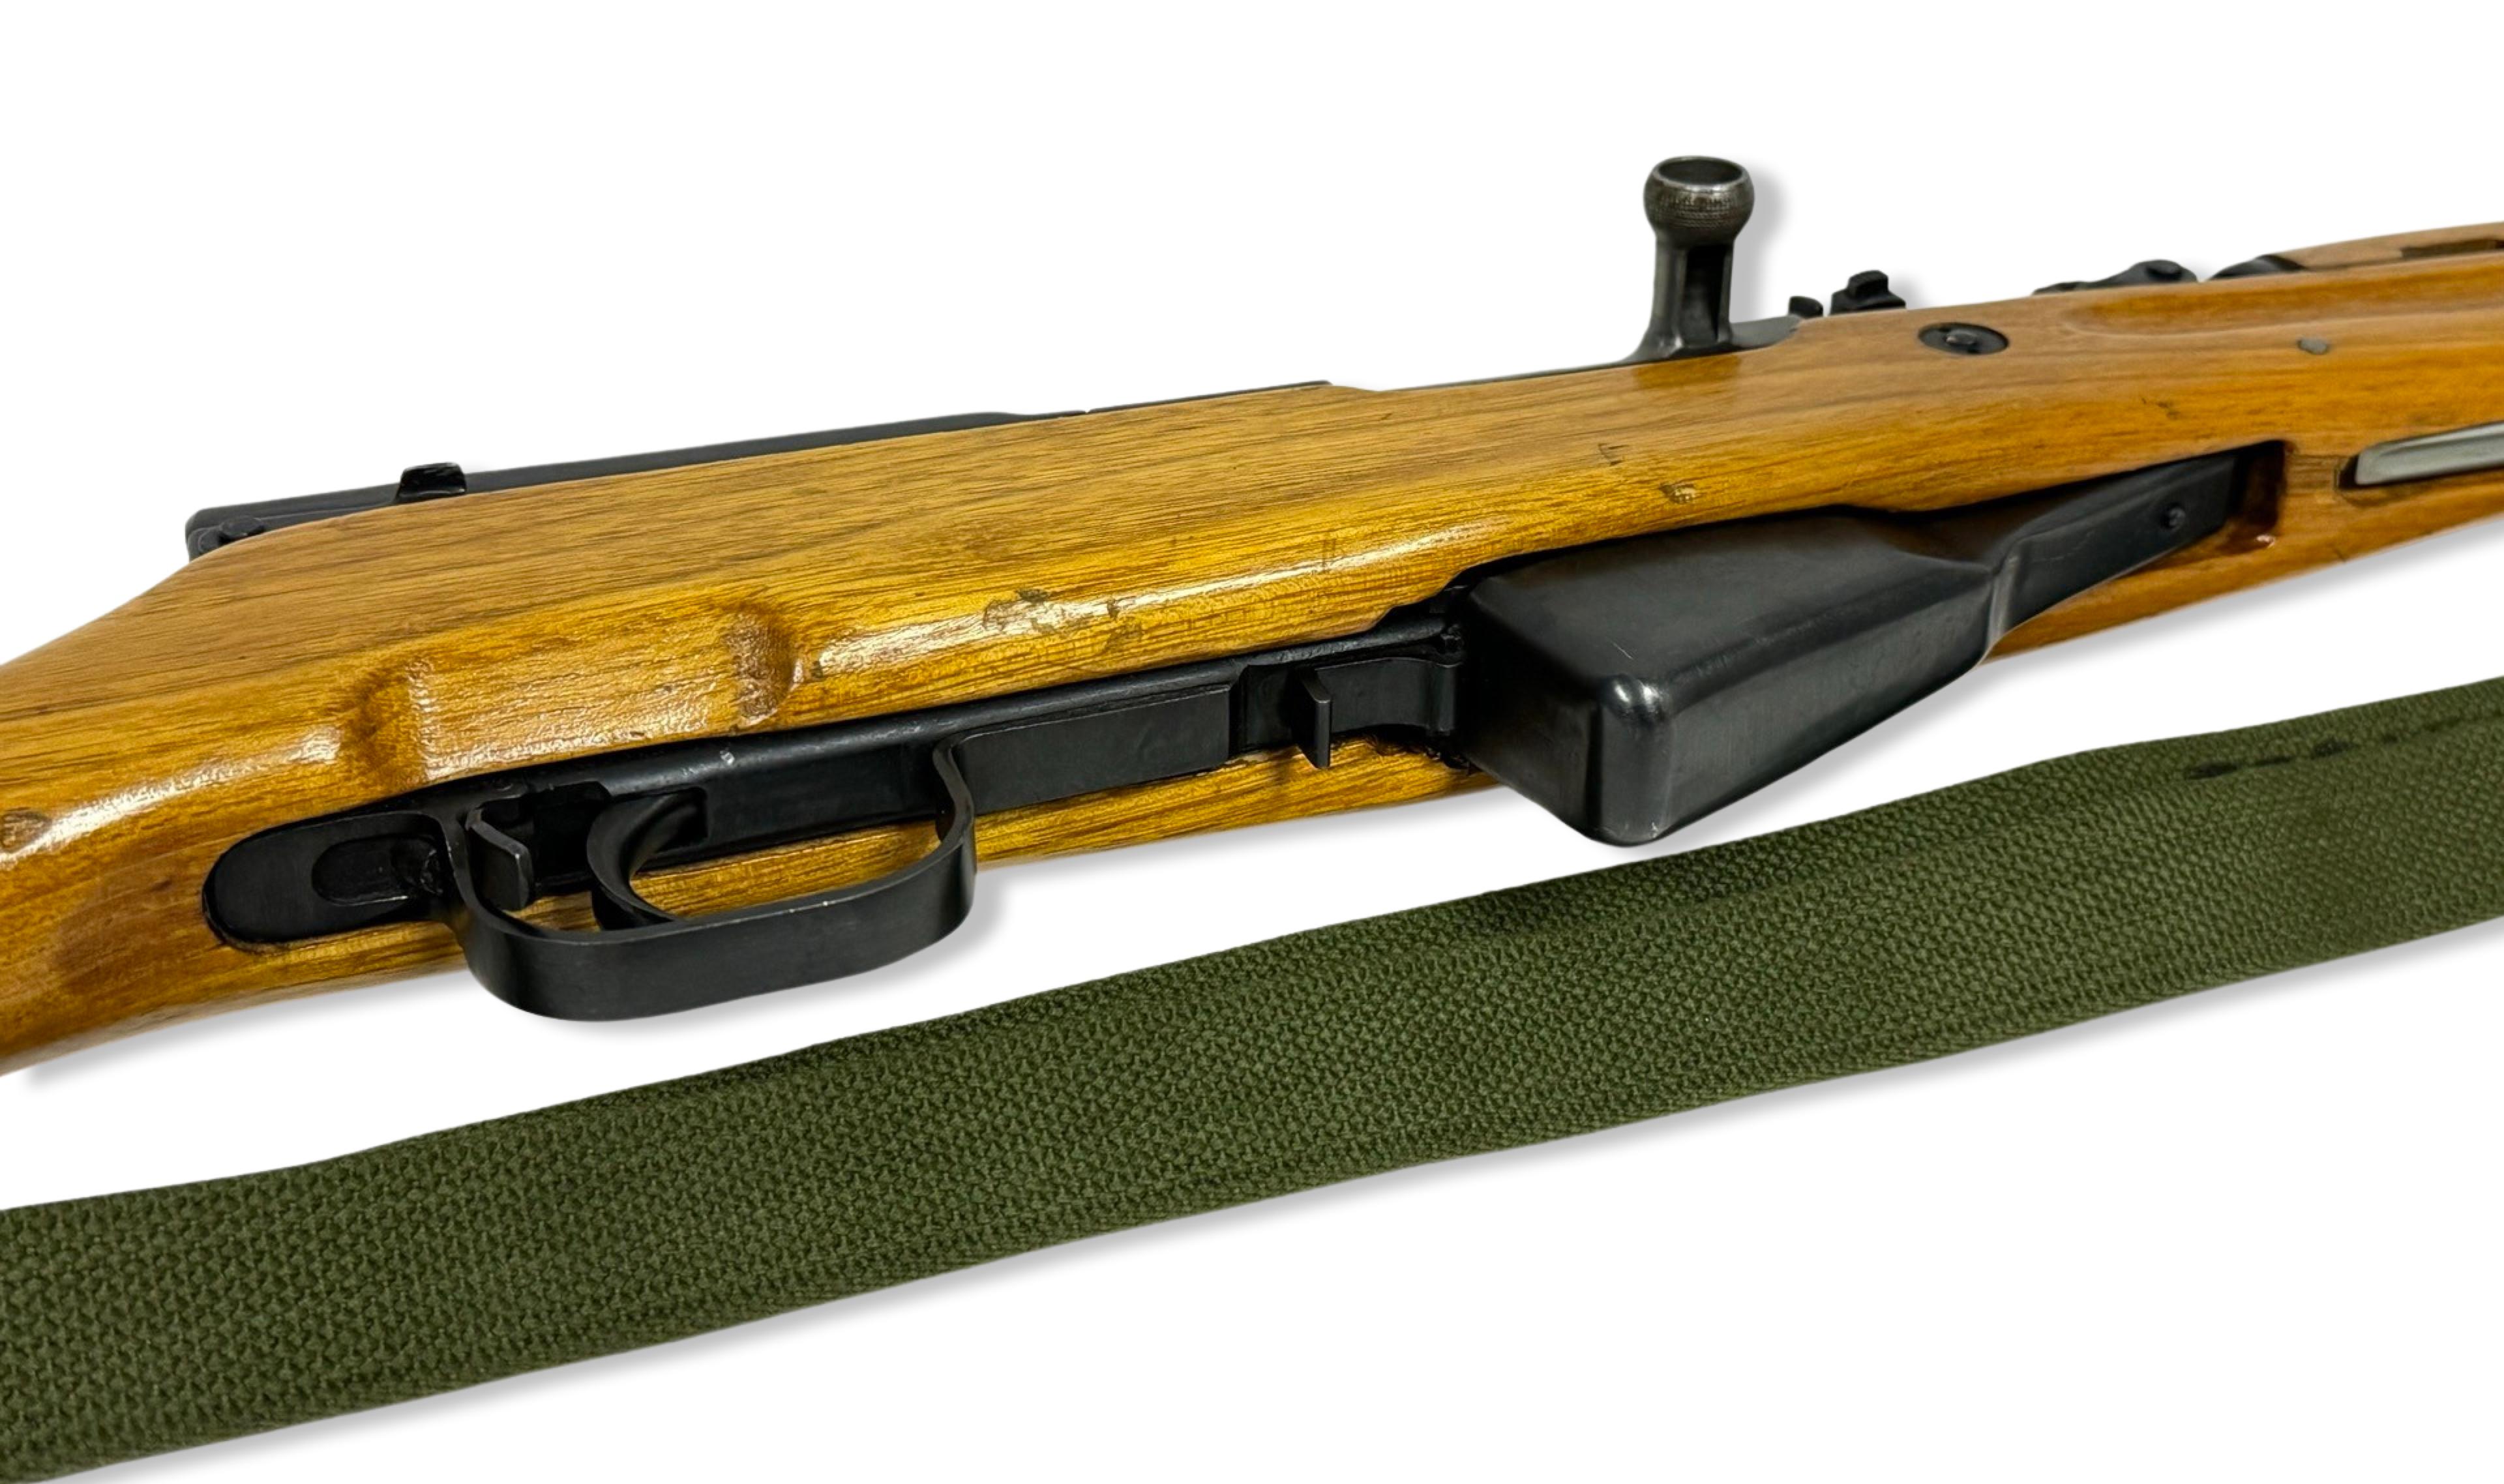 Excellent Norinco Chinese SKS 7.62x39mm Semi-Automatic Rifle with Spiked Bayonet and Sling